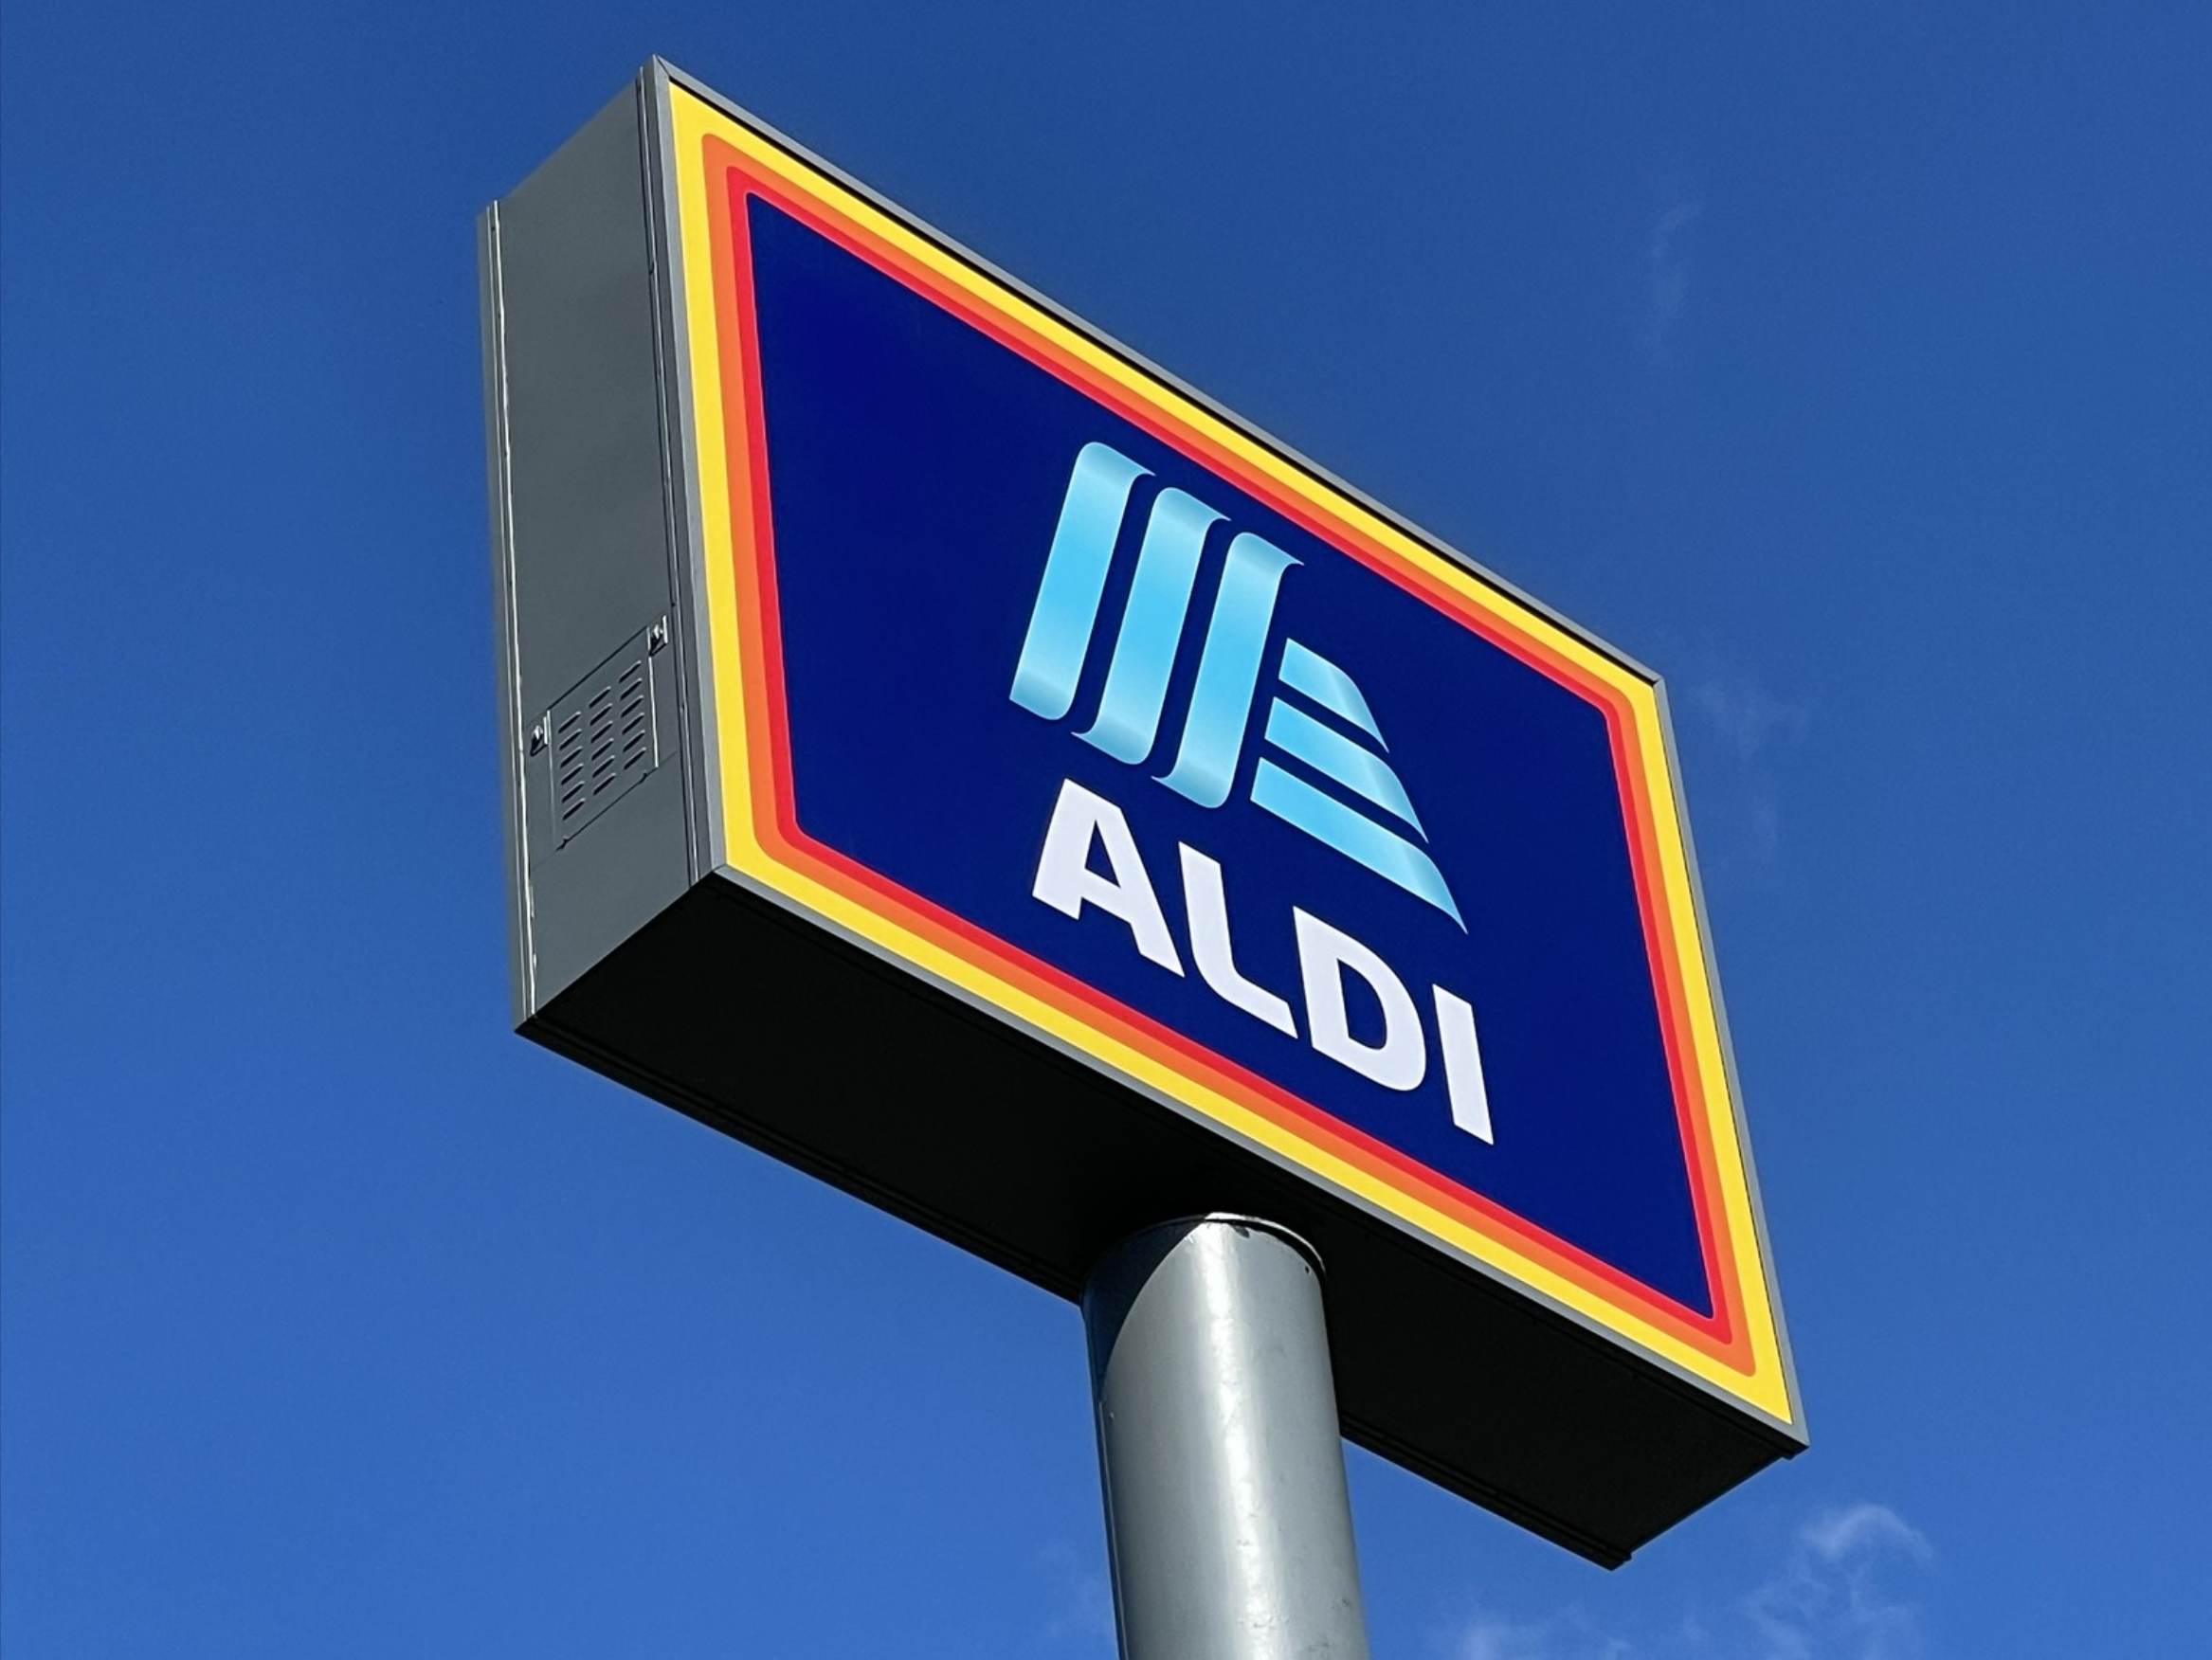 A sign for Aldi in front of a blue sky.